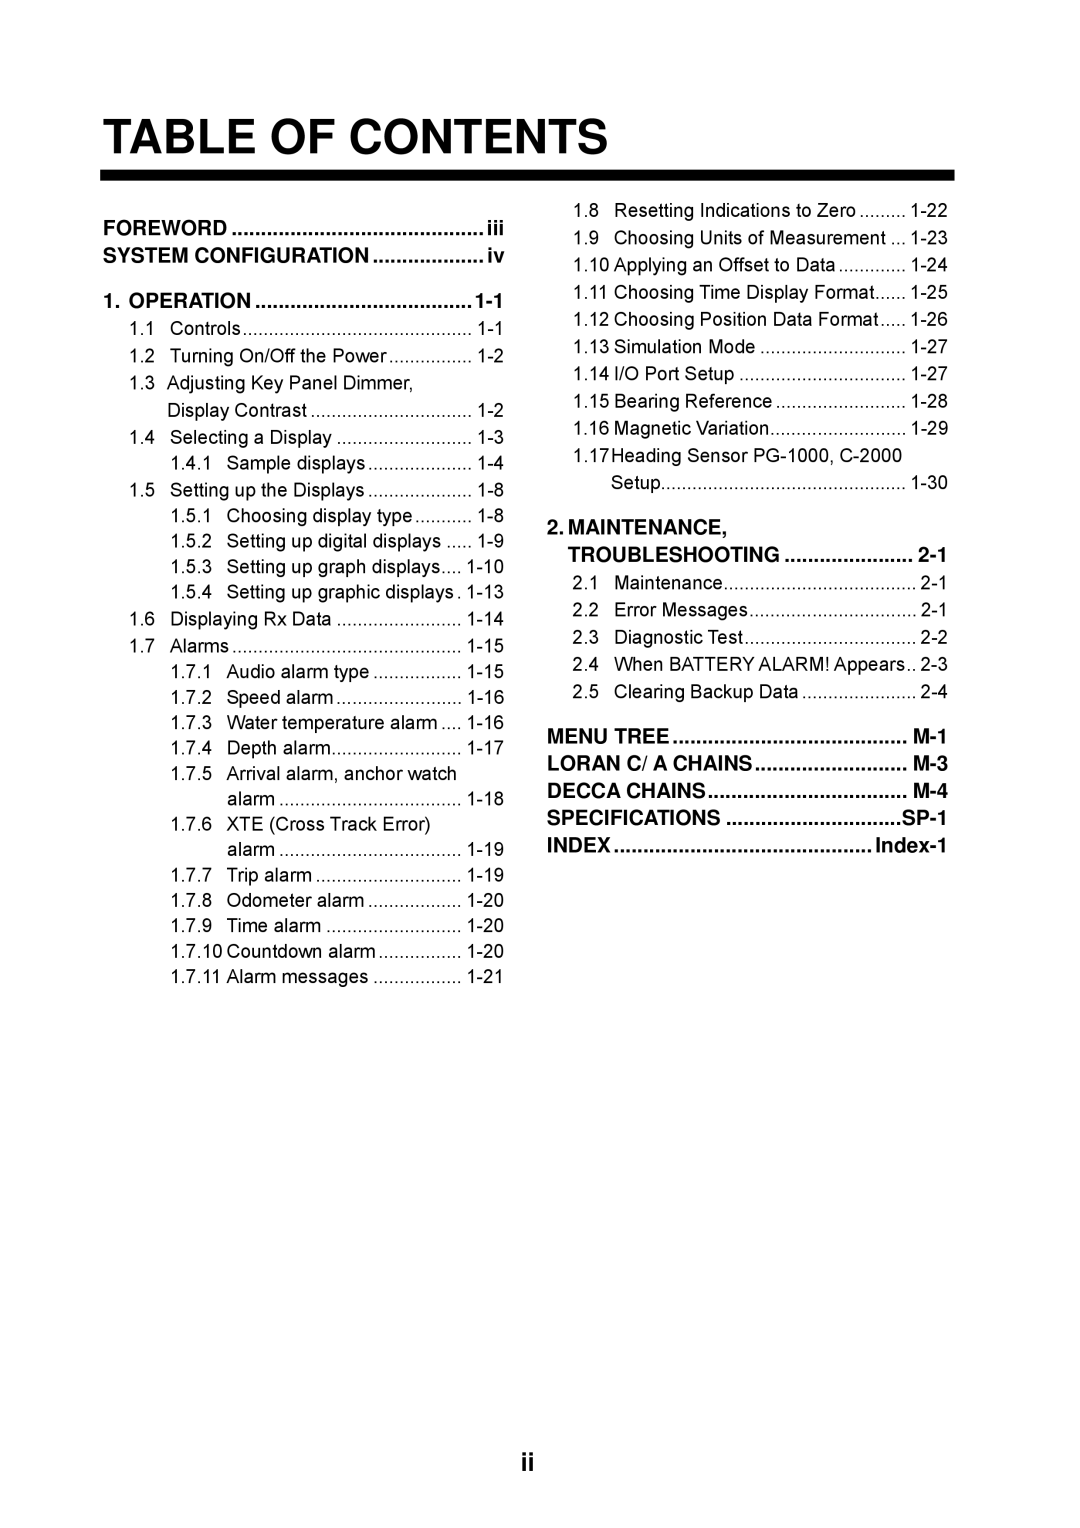 Furuno RD-30 manual Table of Contents 